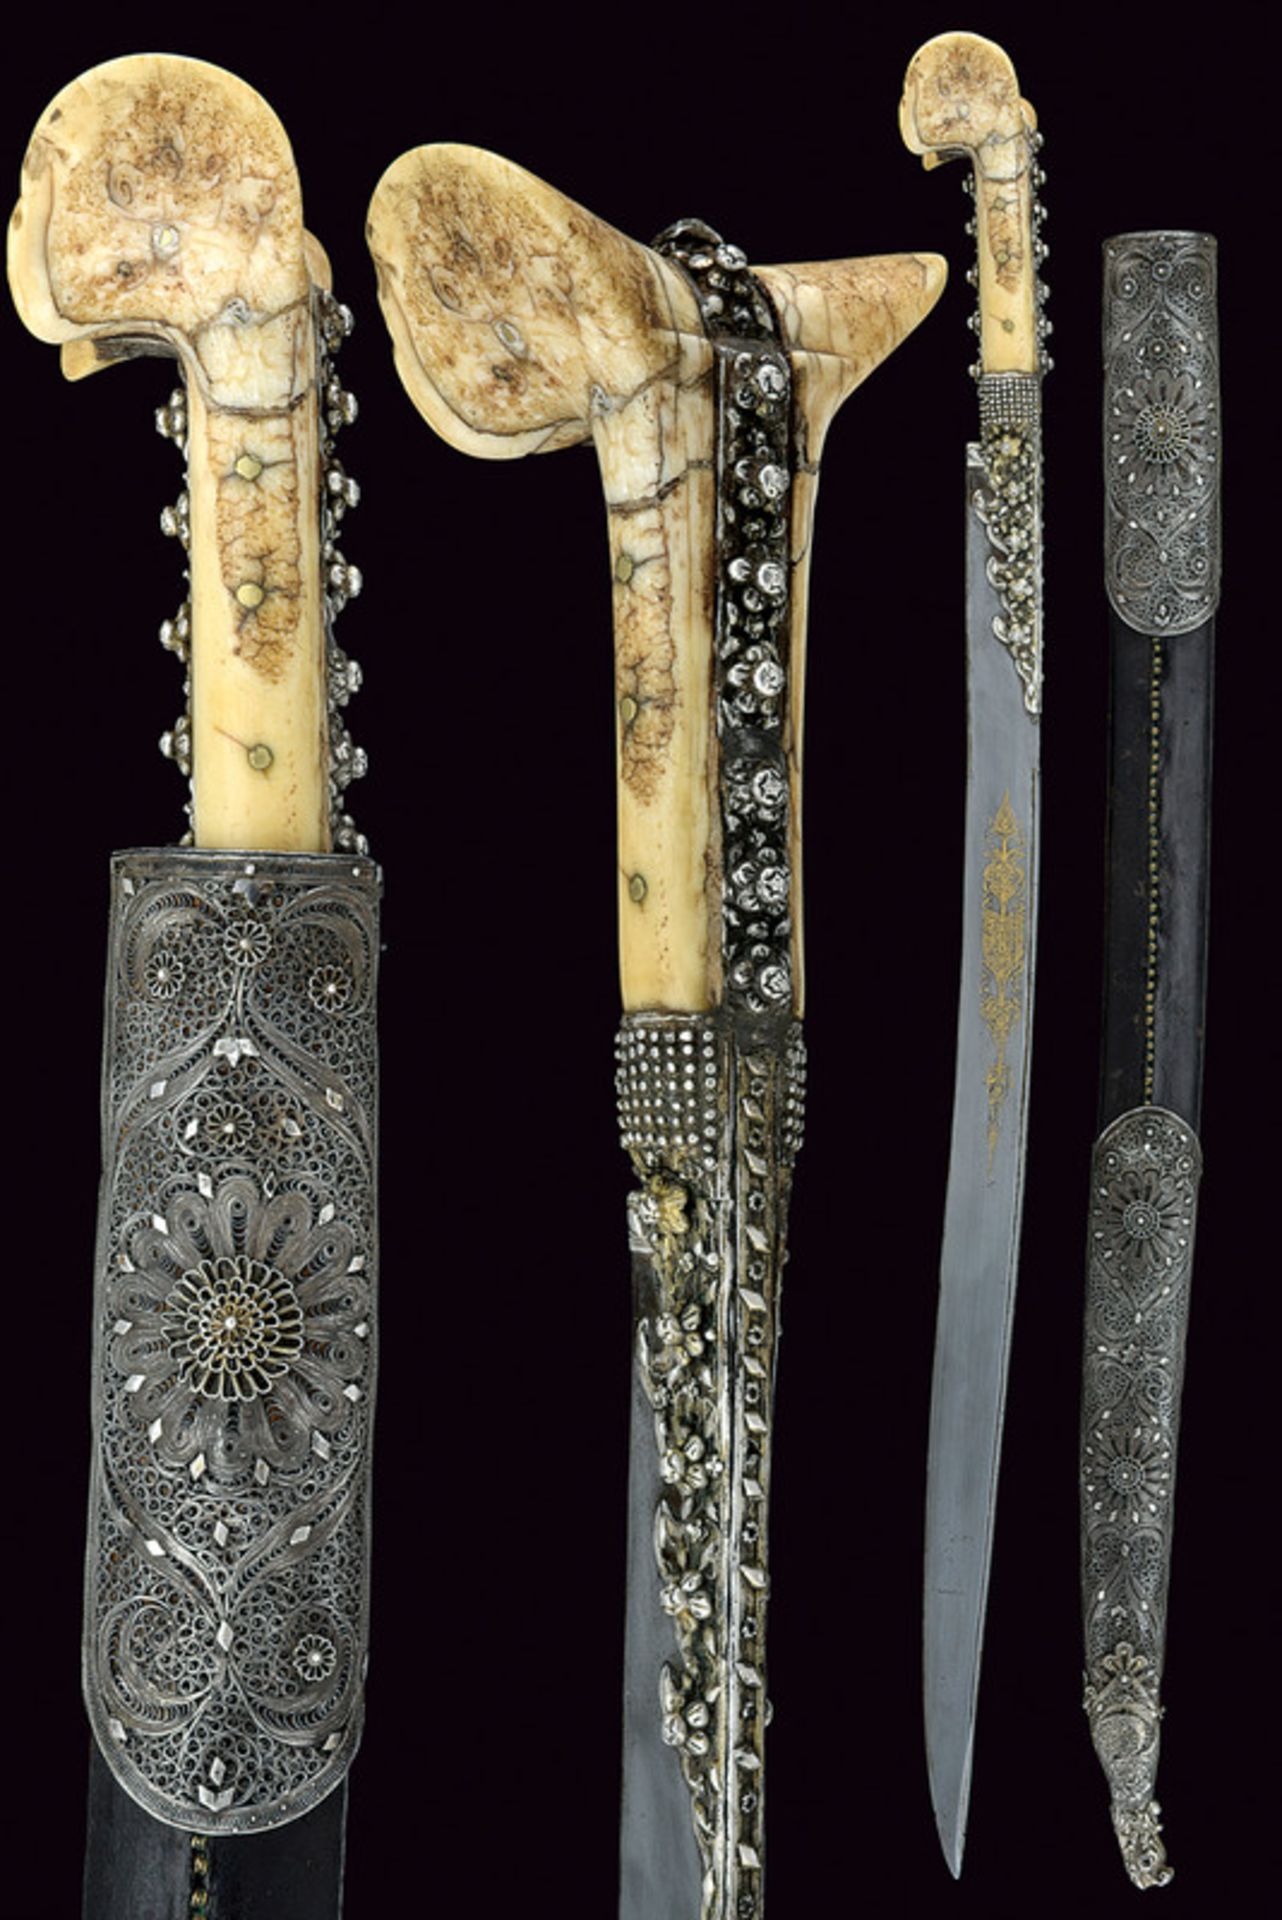 A filigree decorated yatagan dating: early 19th Century provenance: Turkey Slightly curved, single-